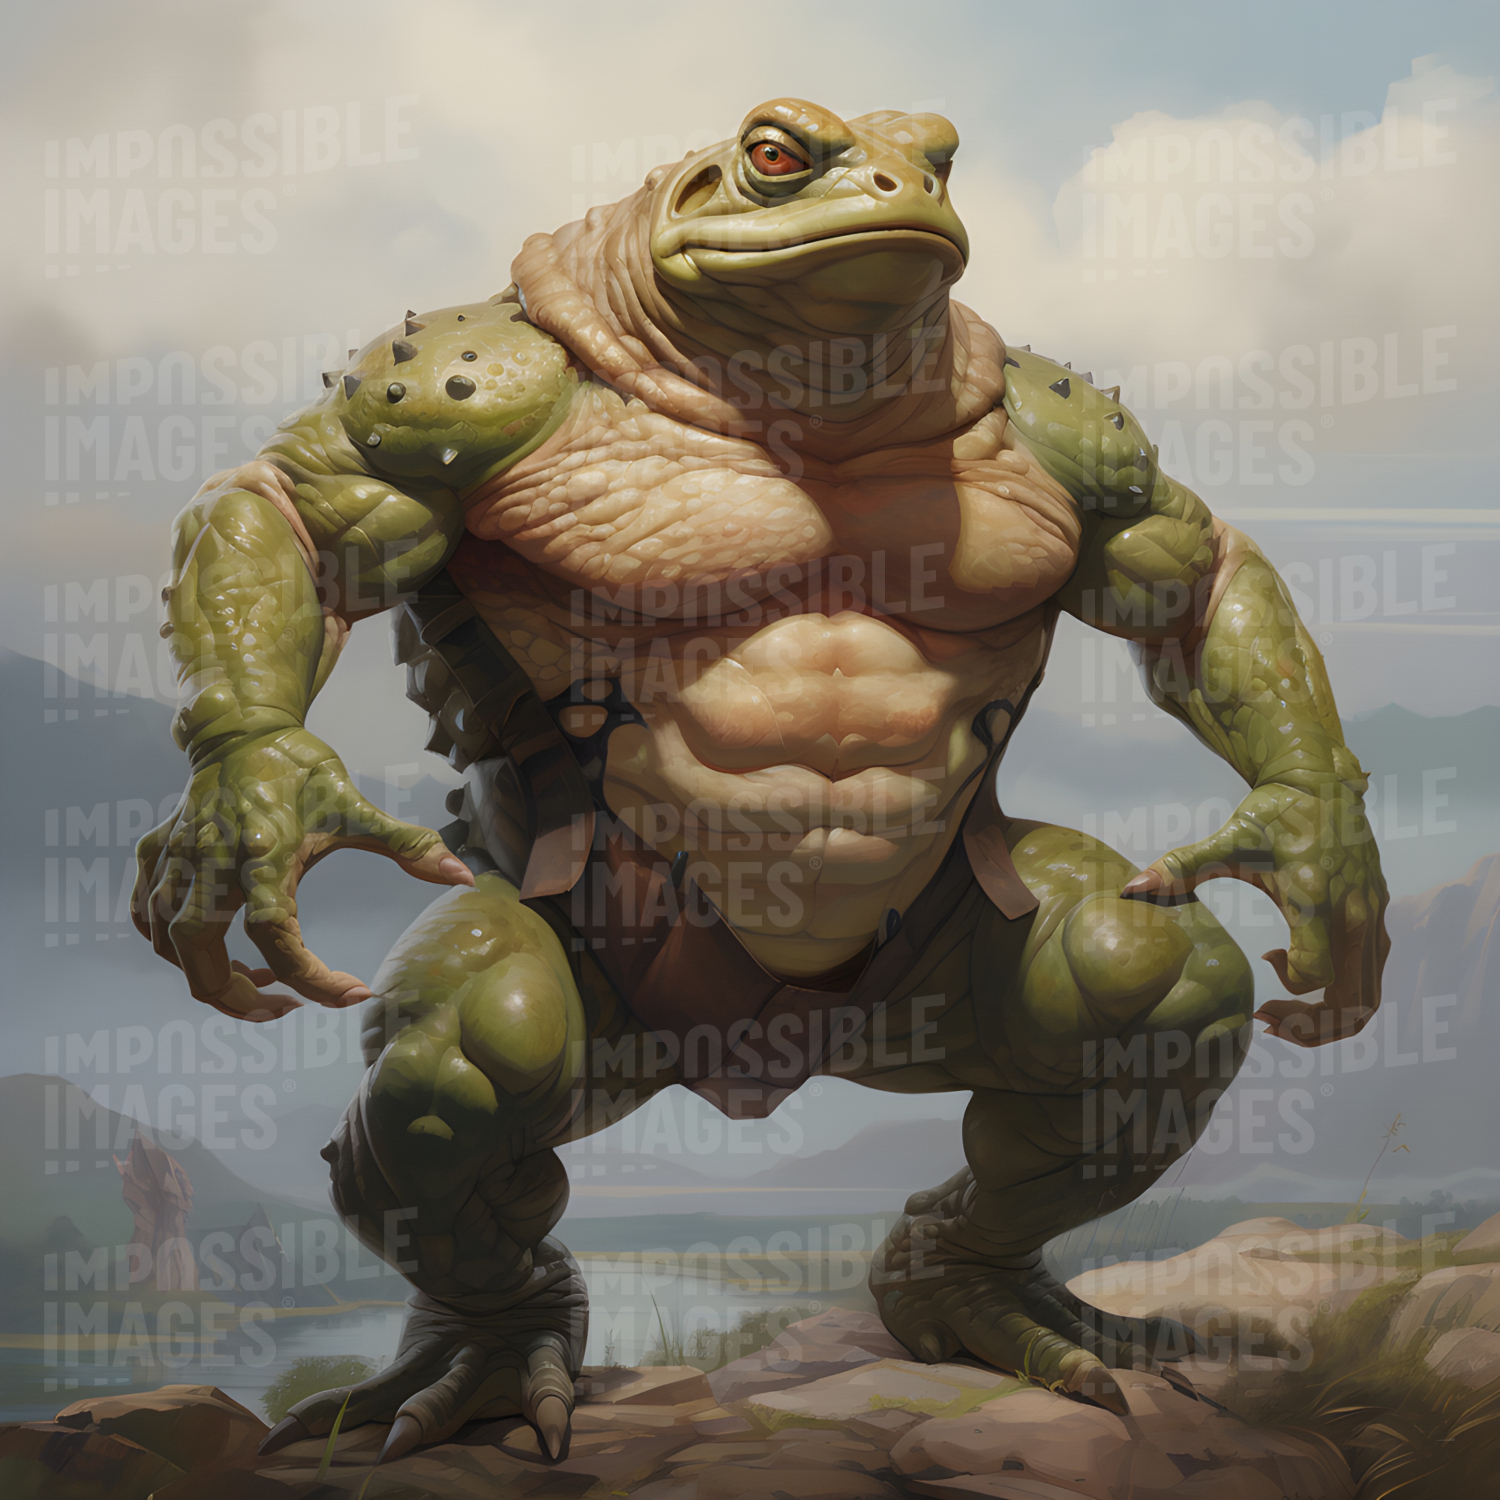 Extremely muscular frog